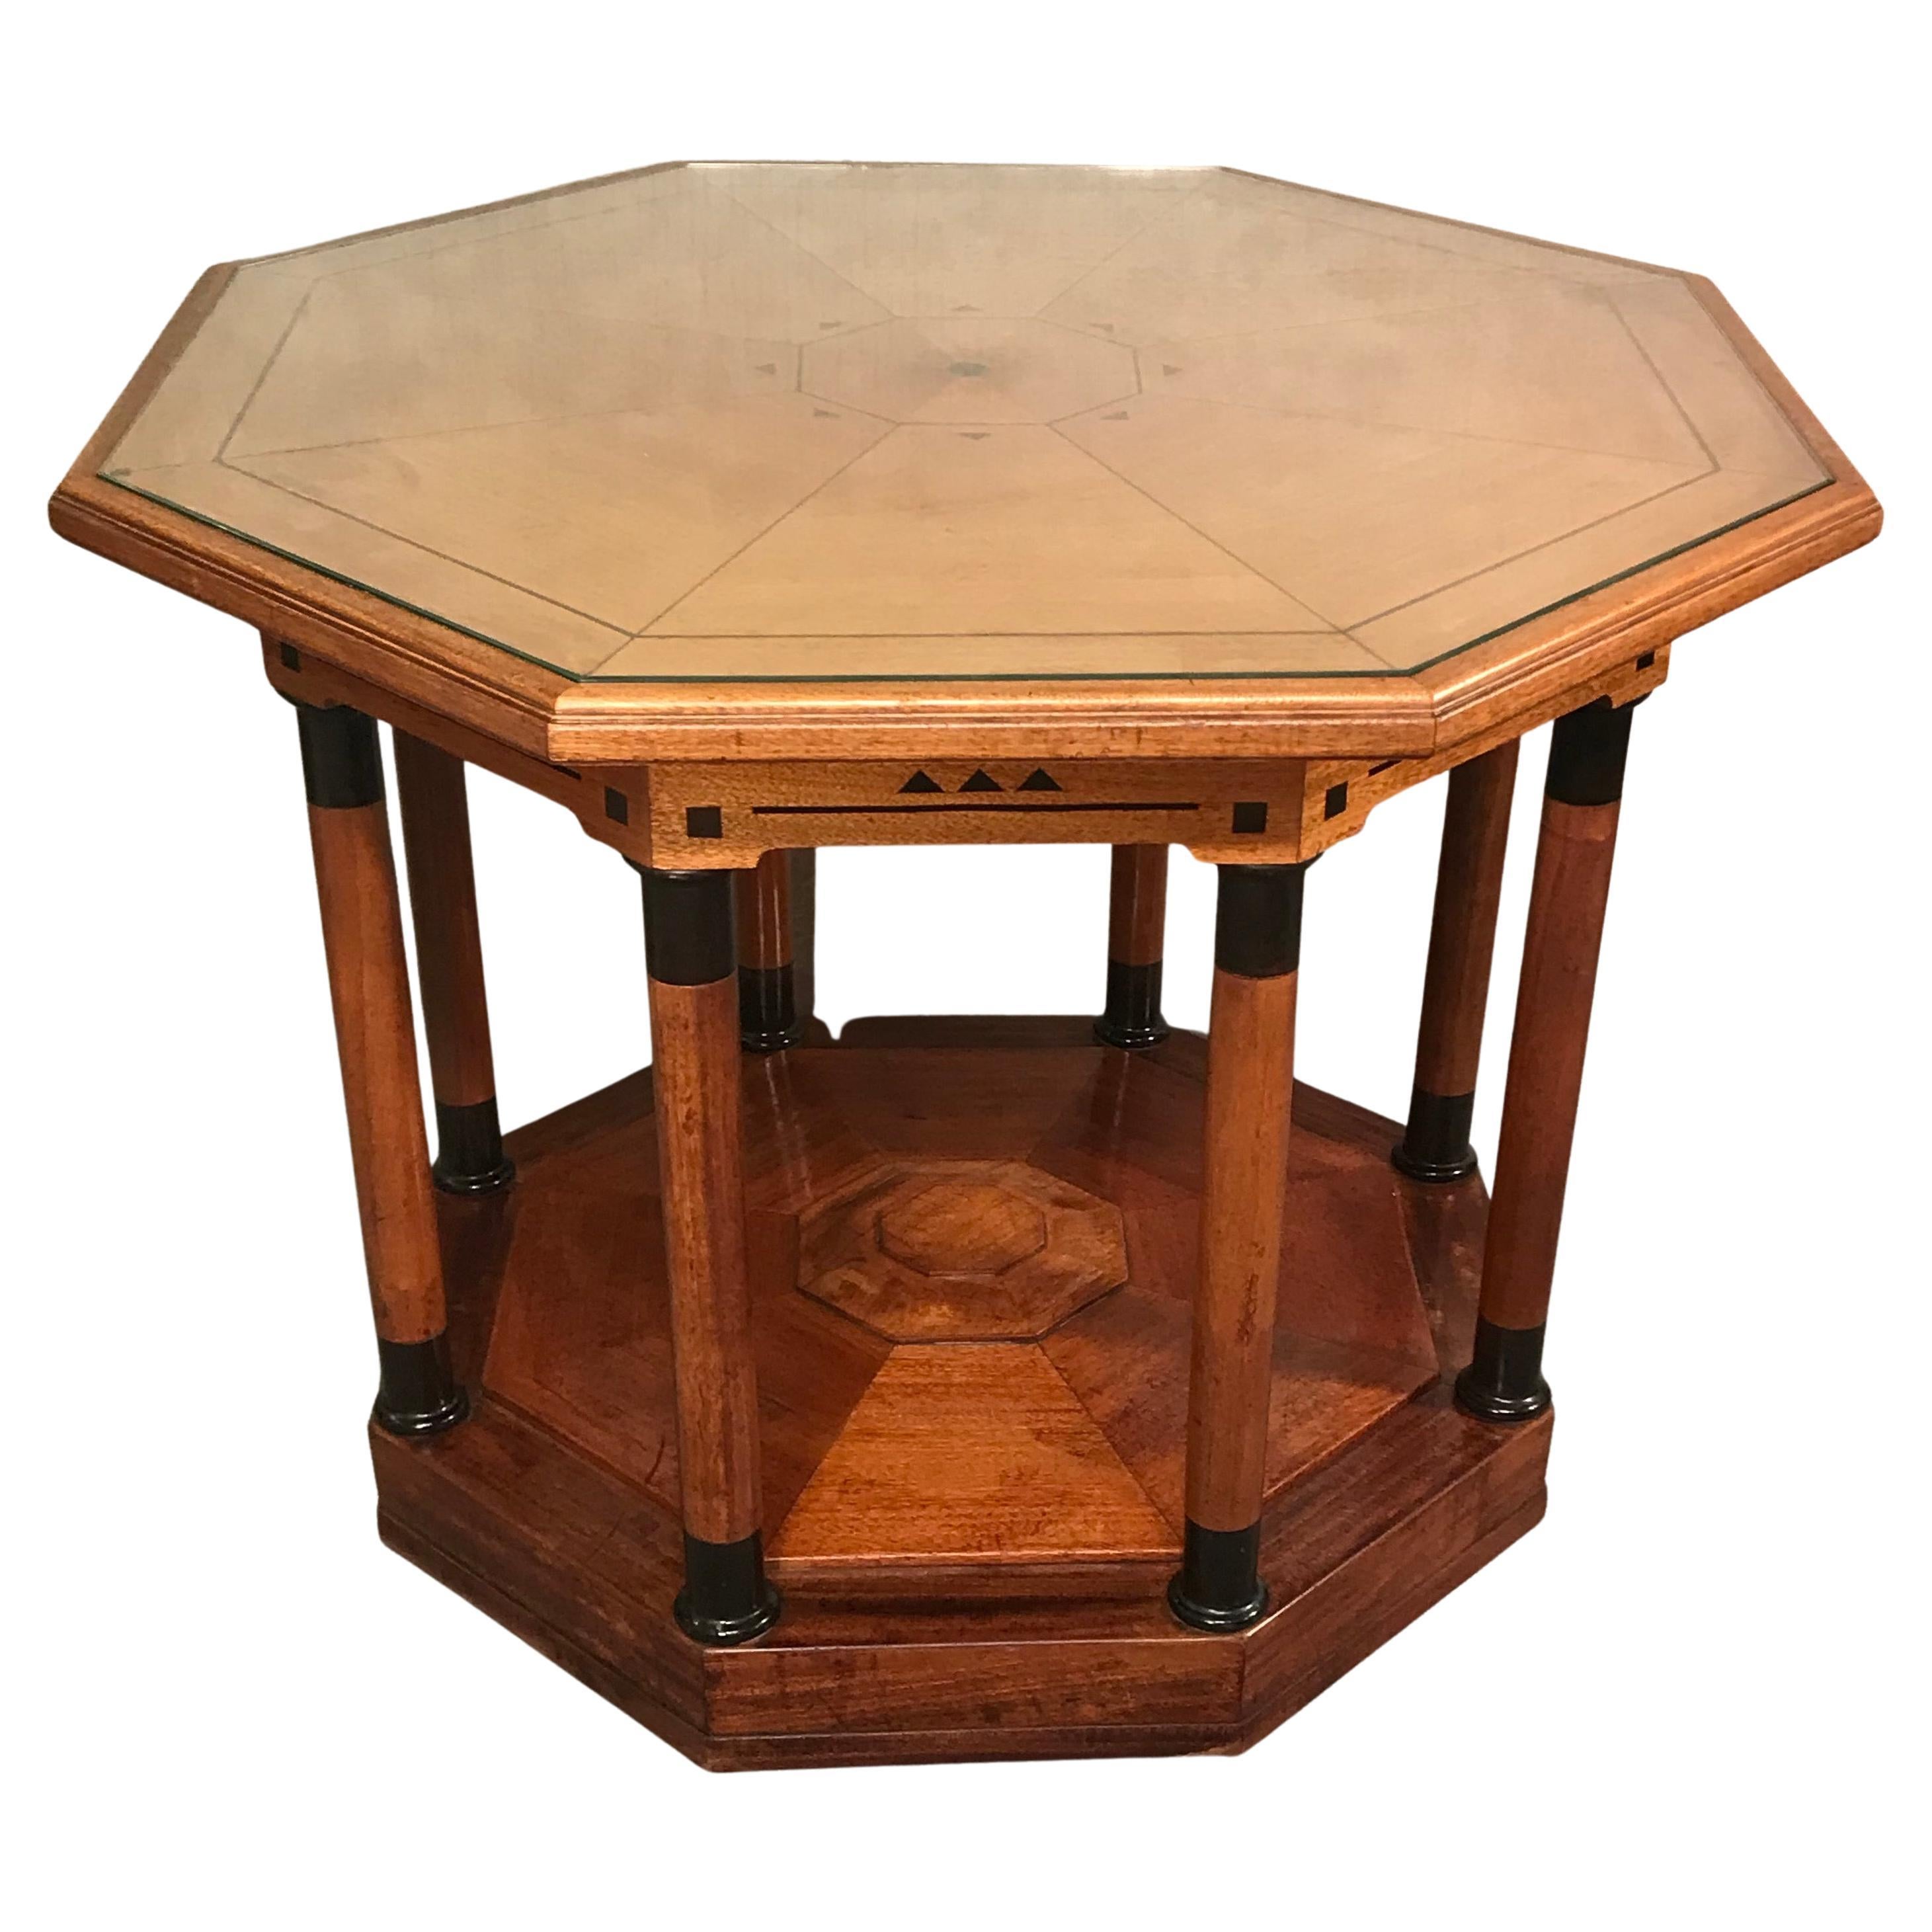 This unique Art Deco table dates back to around 1910-20. It comes from Germany. The table has a walnut veneer and is decorated with geometric ebonized inlays of different types of wood. It has an octagonal top with a protecting glass on top. The